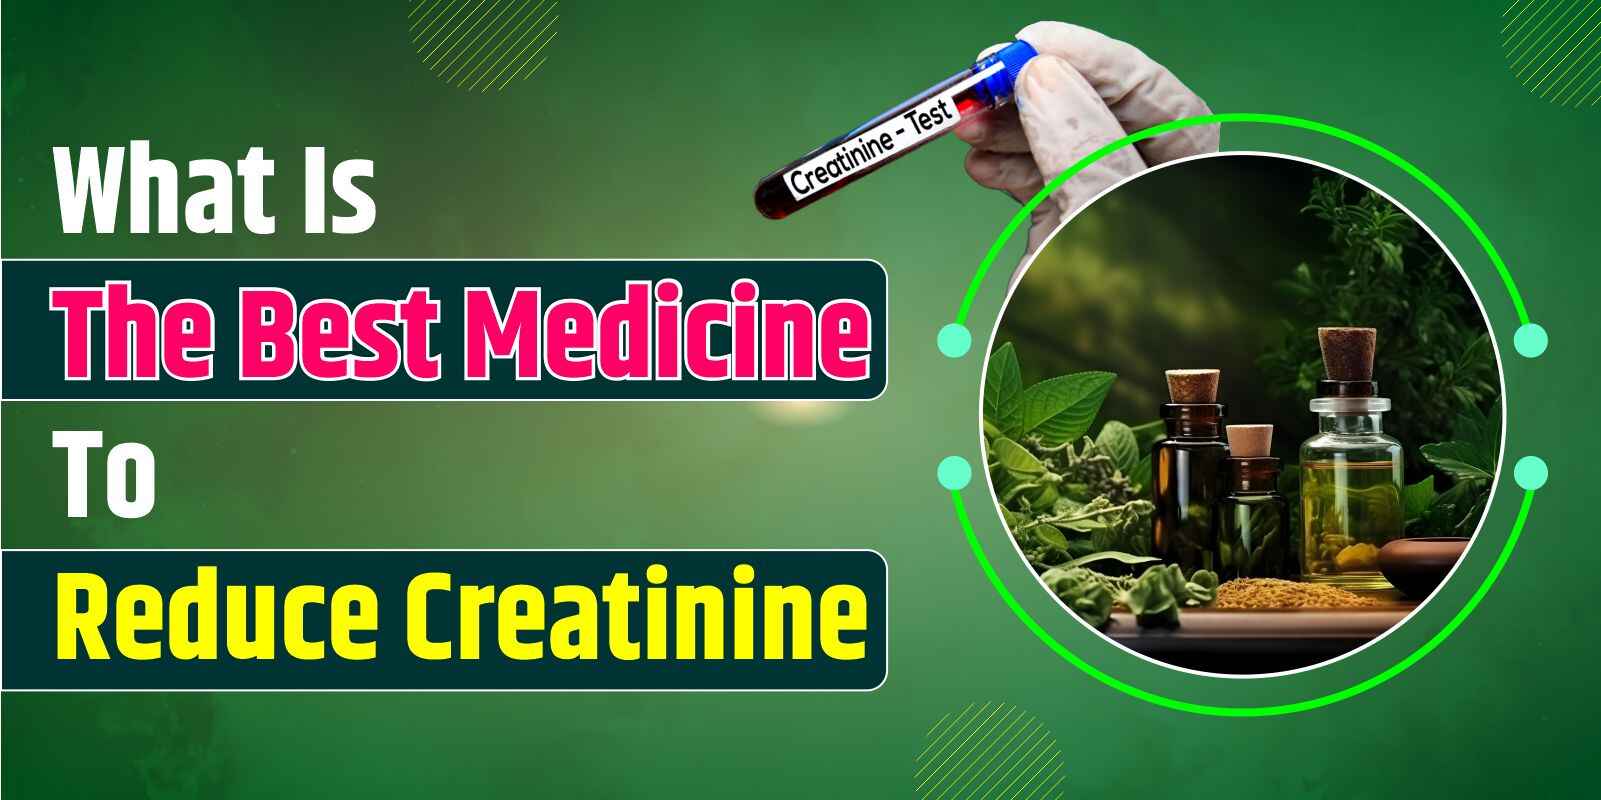 What Is The Best Medicine To Reduce Creatinine